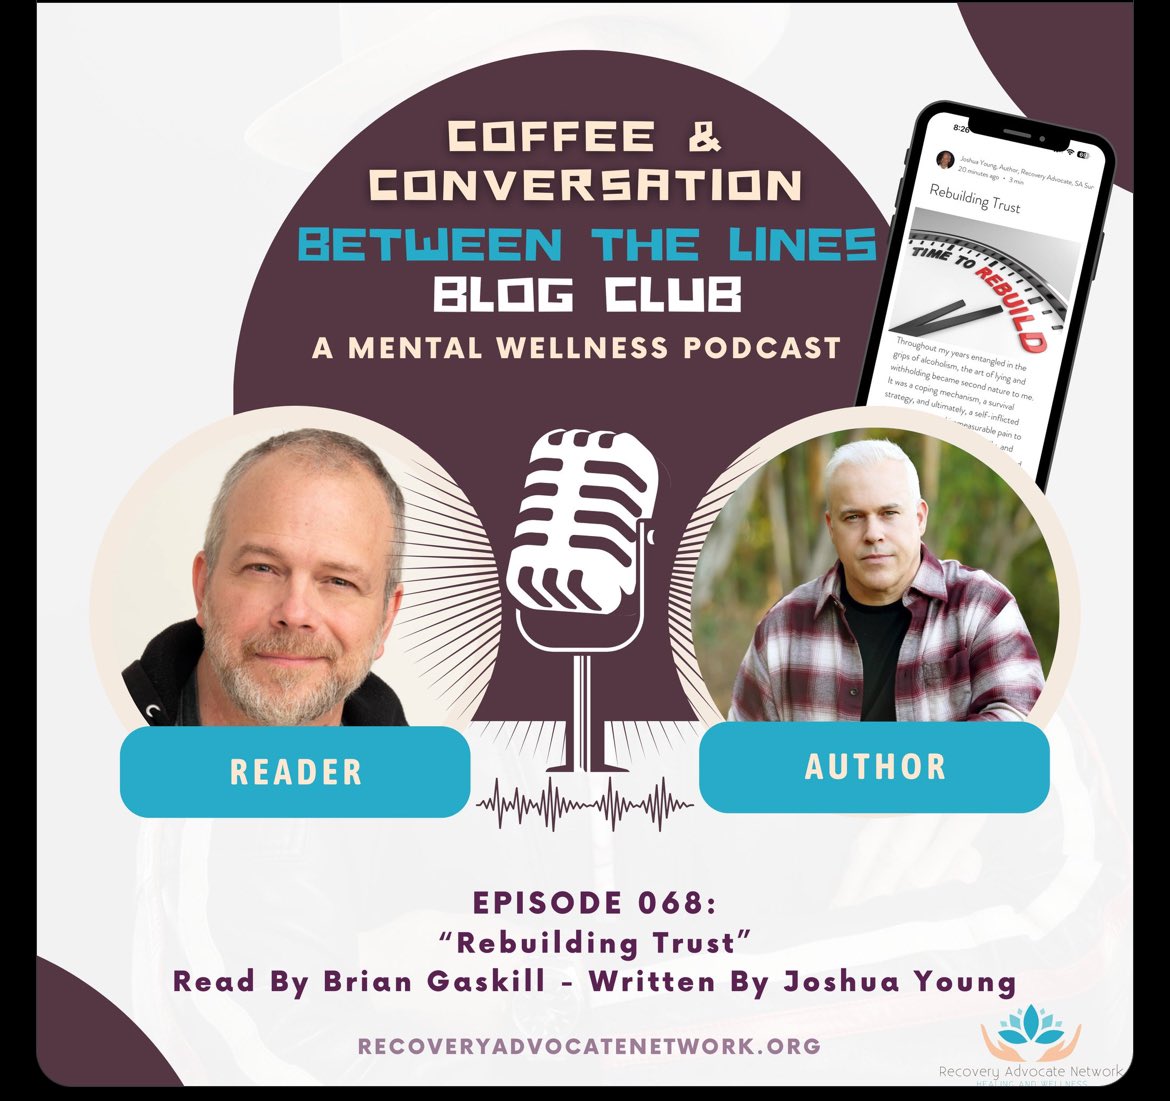 I hope everyone will go listen to this. If you need the link, let me know. #Podcast #Recovery #MentalHealth #BeTheBestYou #OneDayAtATime #Life #Actor #Reading